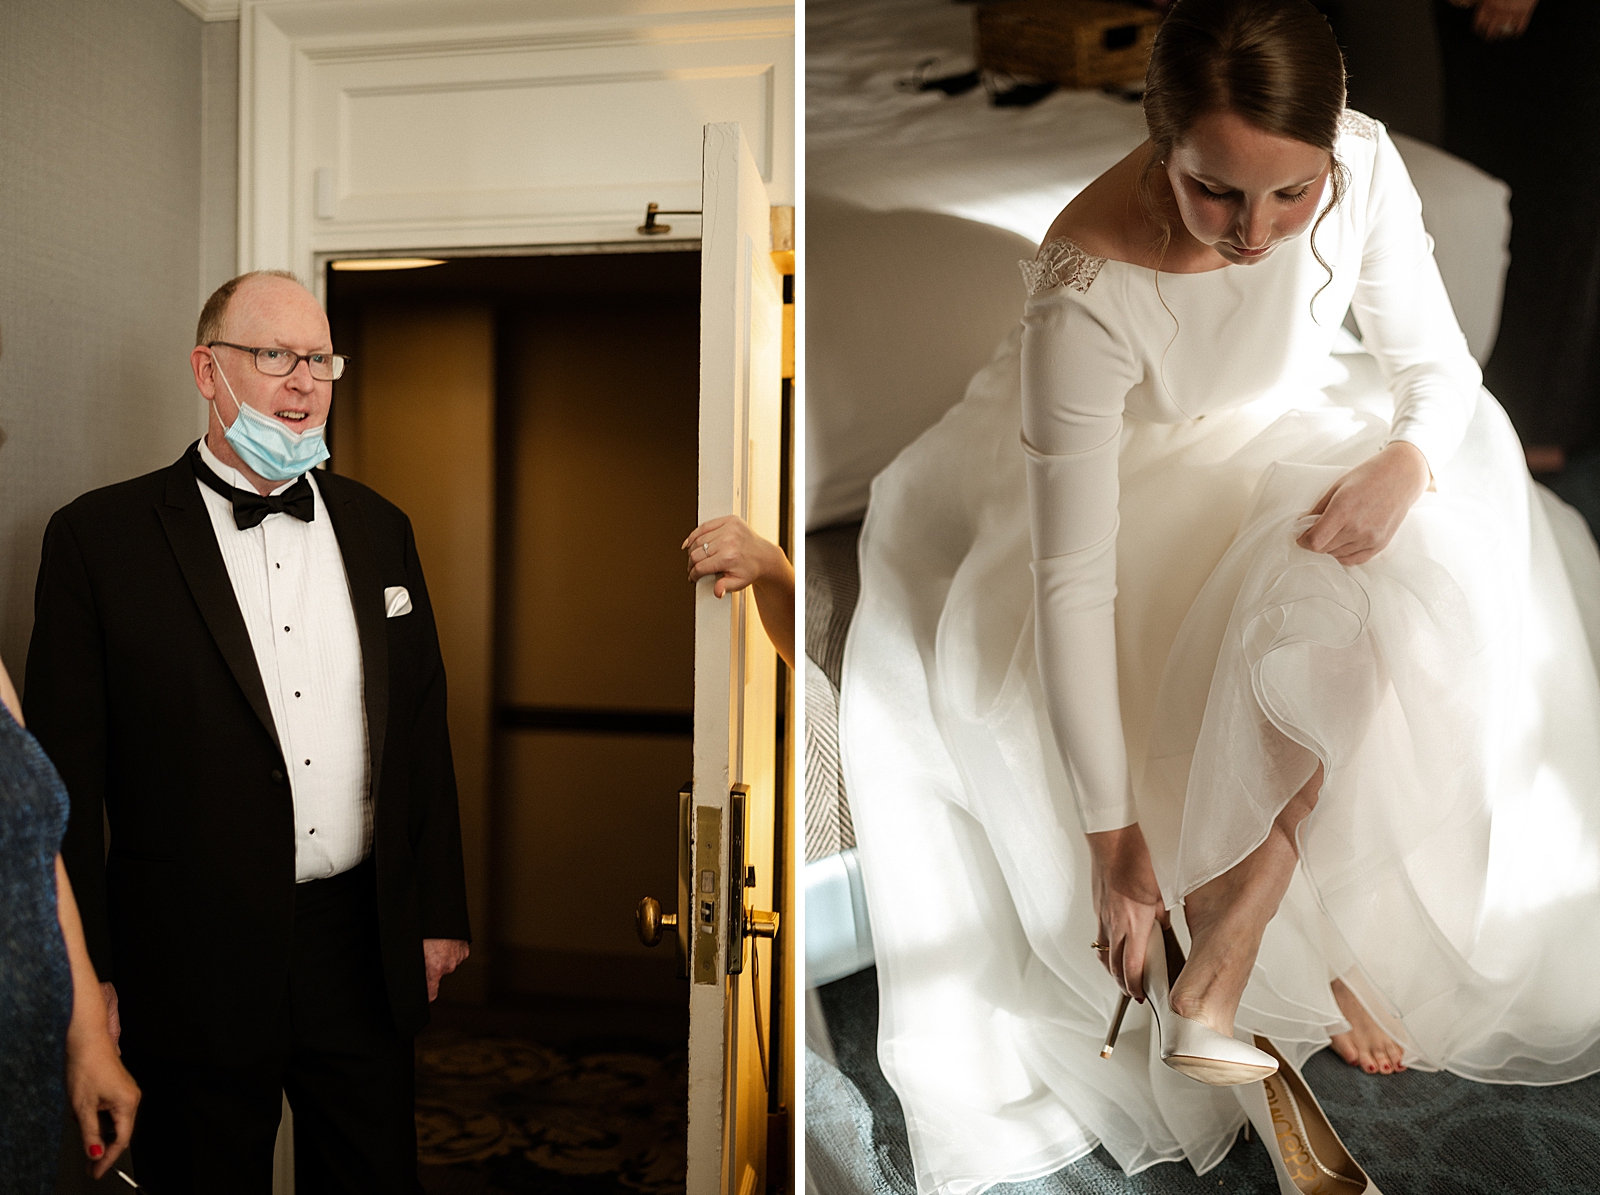 Father reacting to Bride after getting ready and Bride putting of Wedding heels